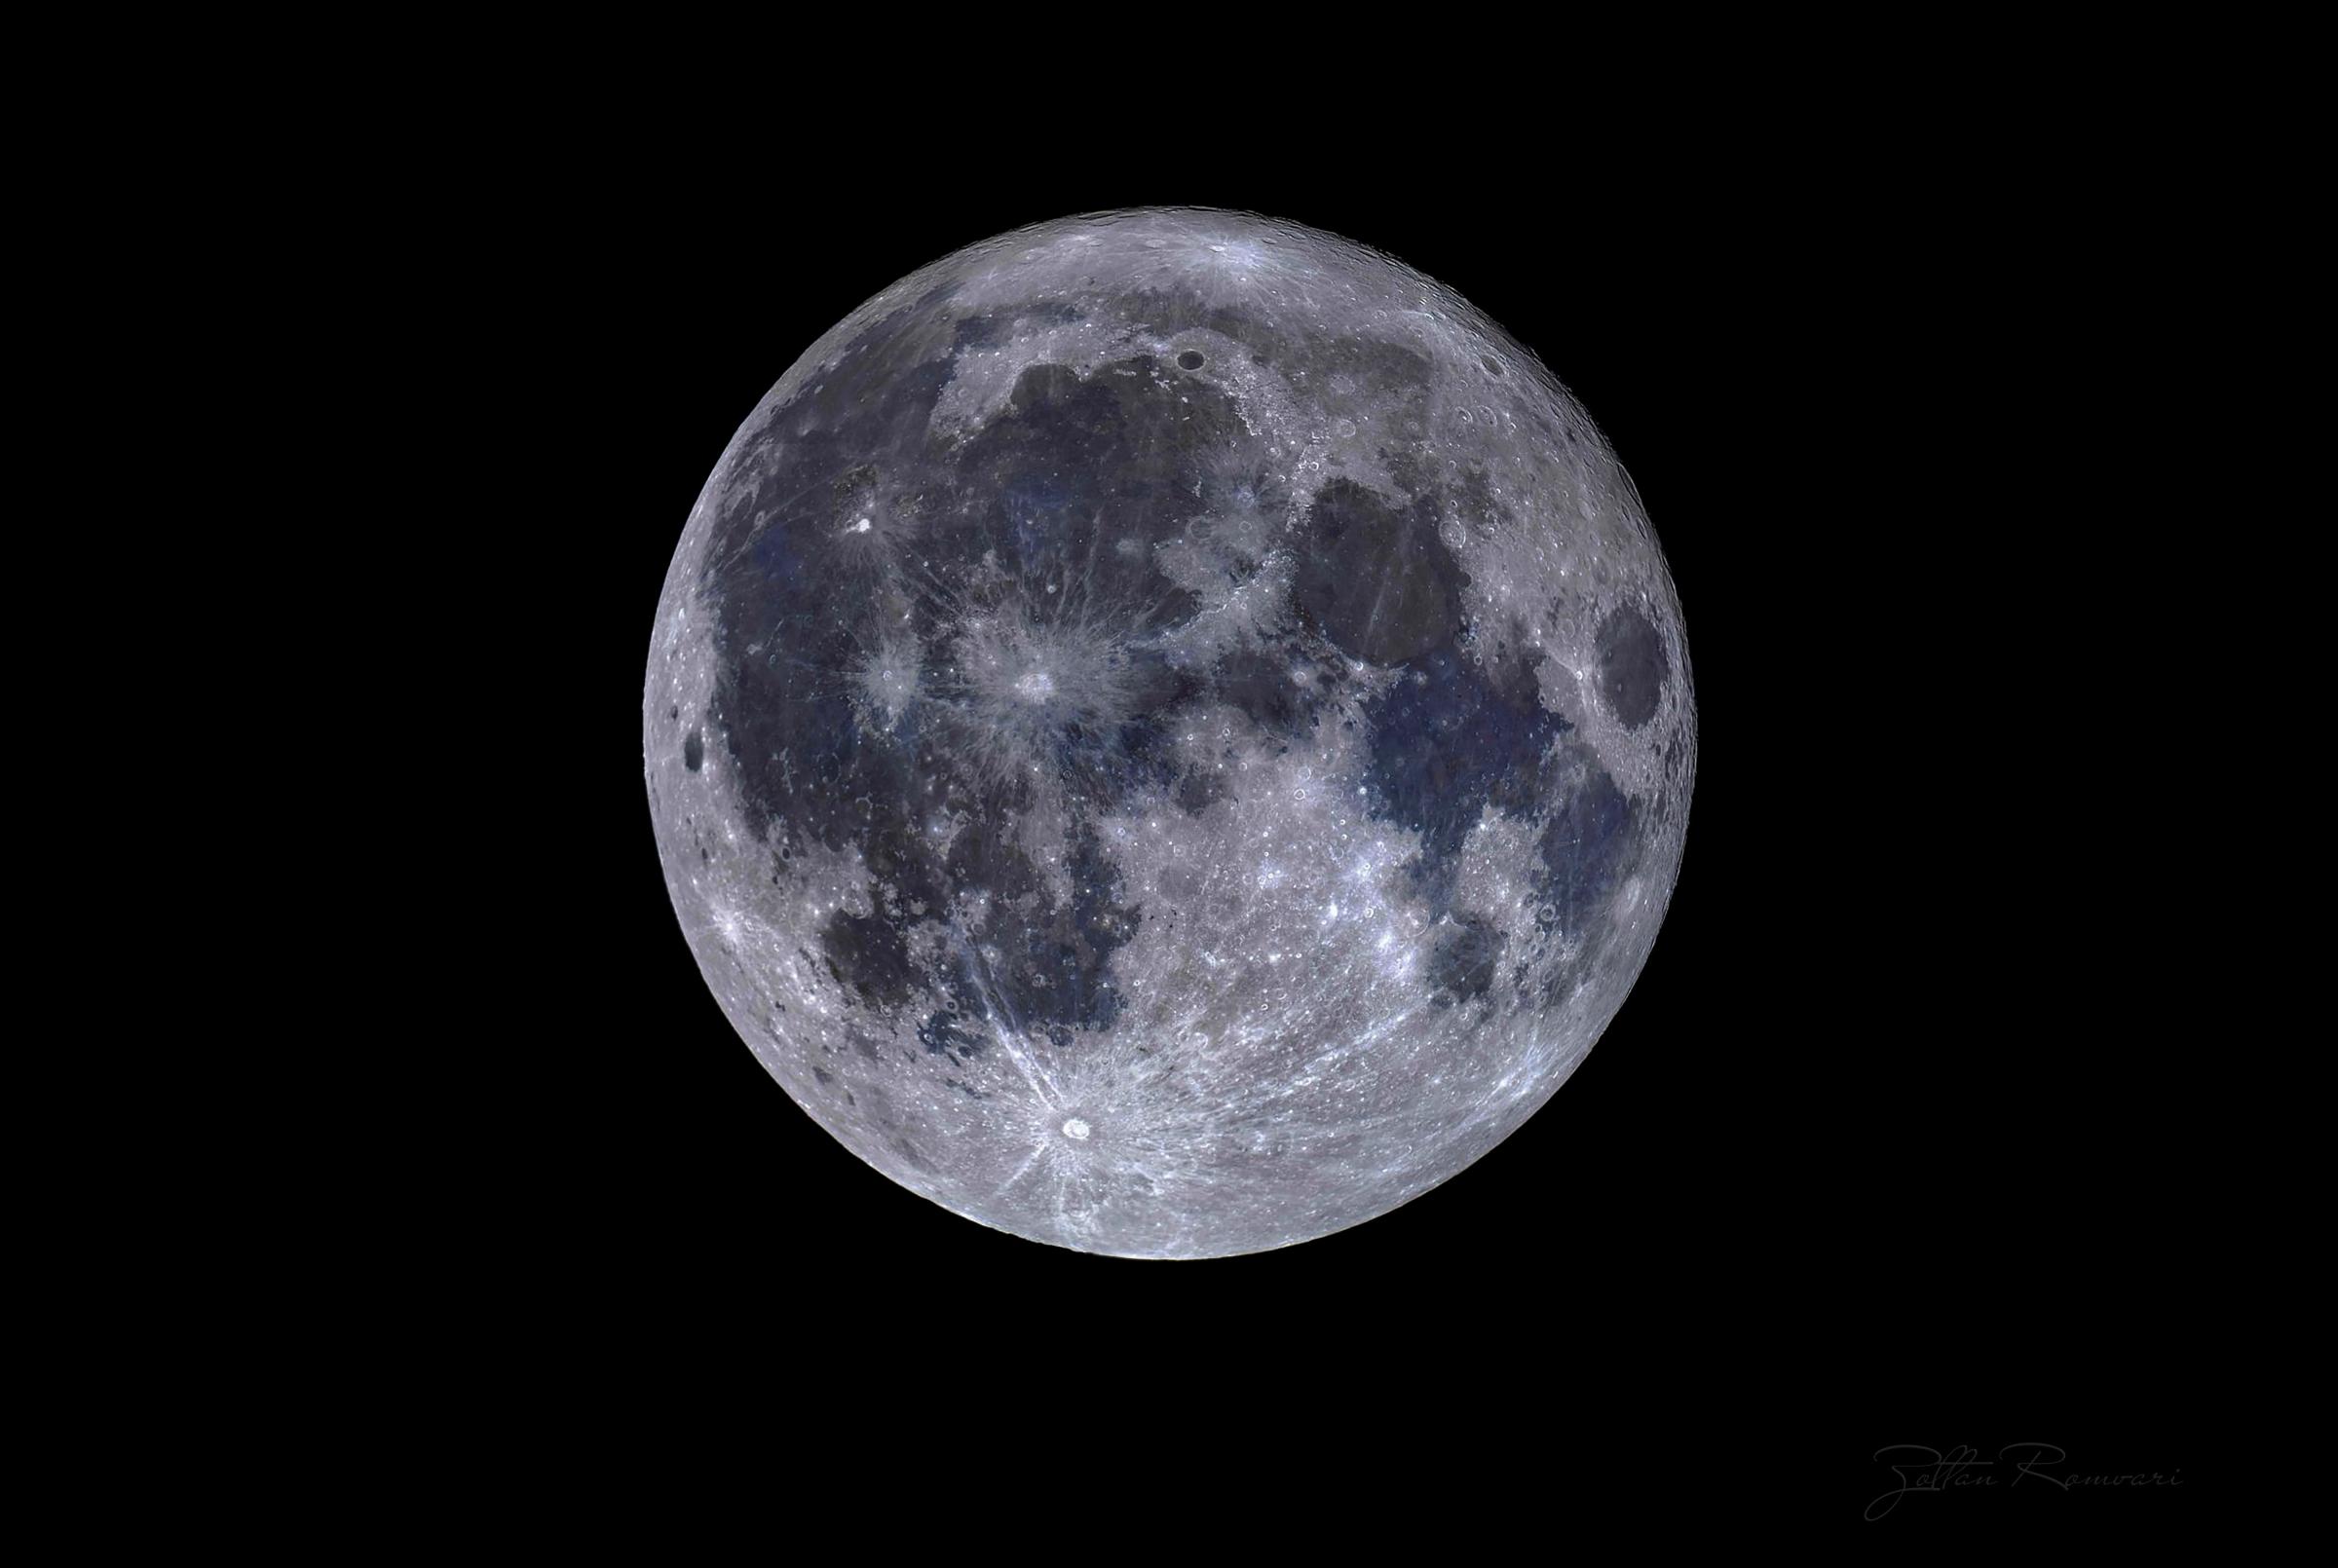 The blue supermoon at the end of August